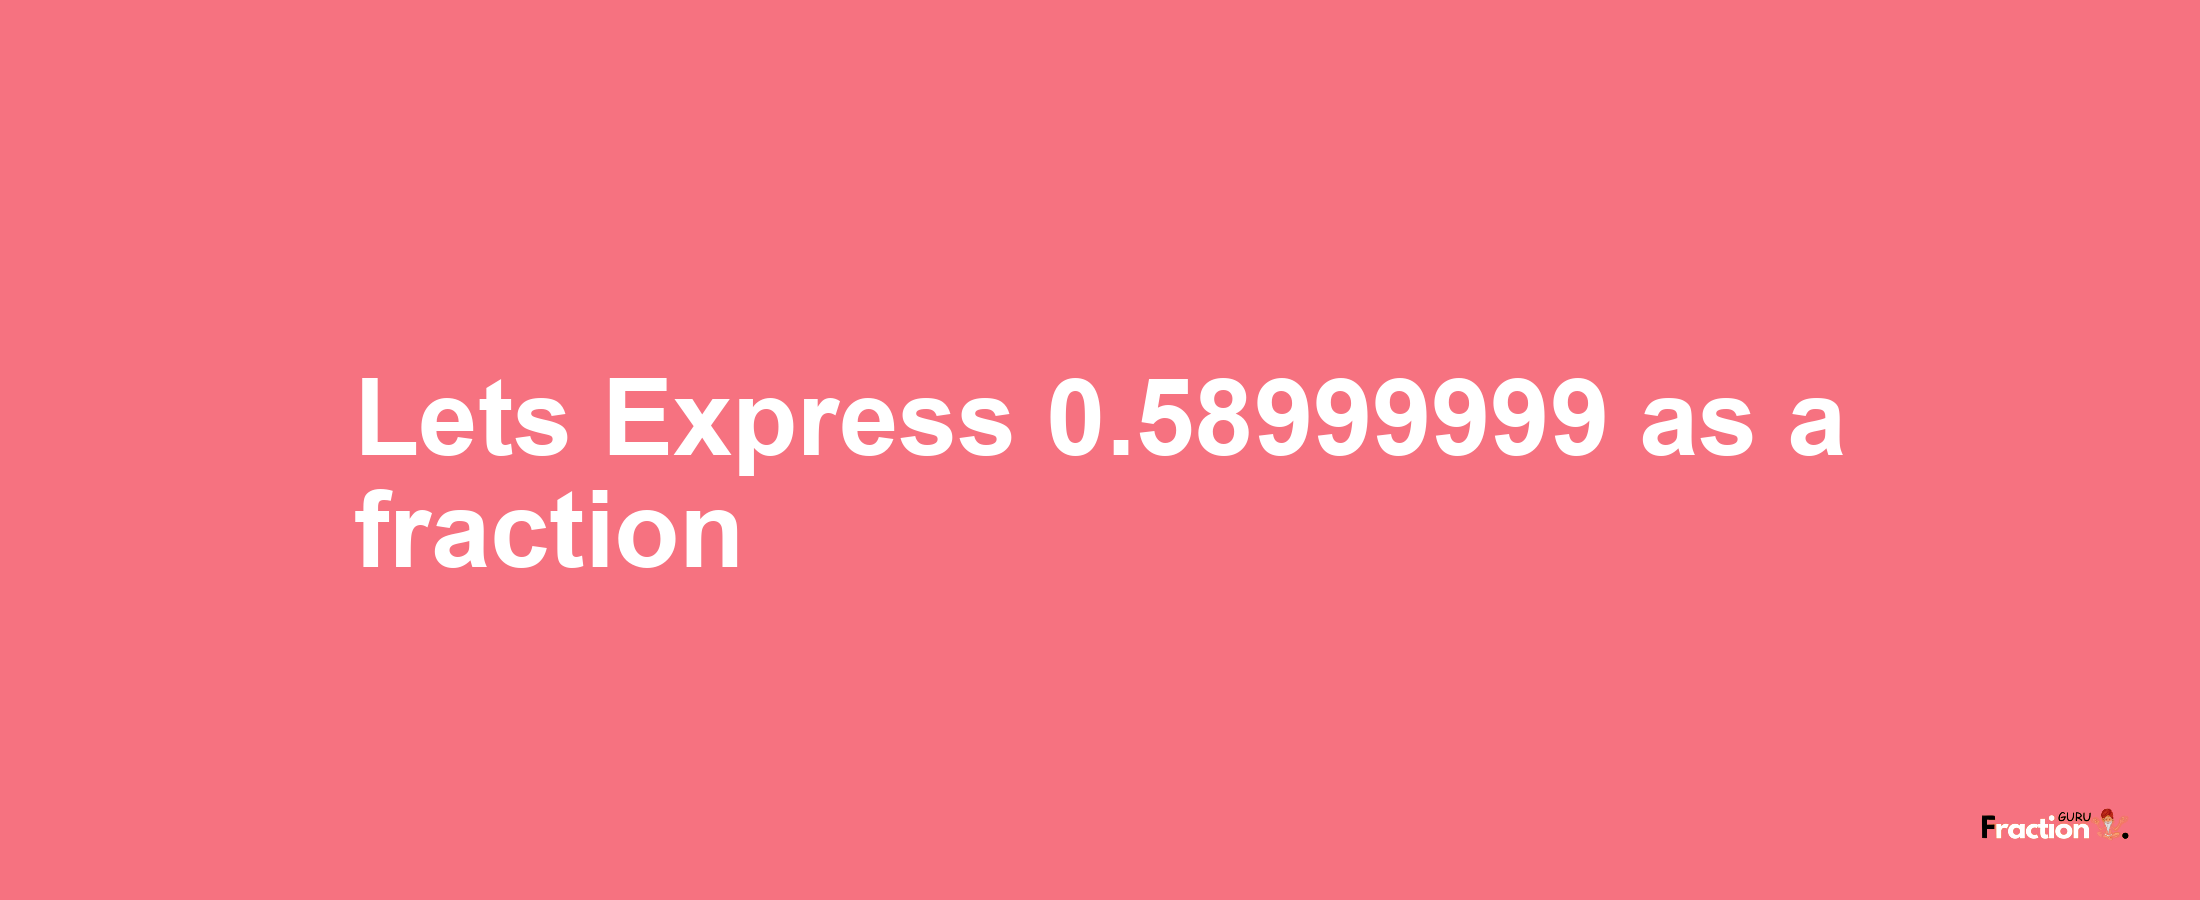 Lets Express 0.58999999 as afraction